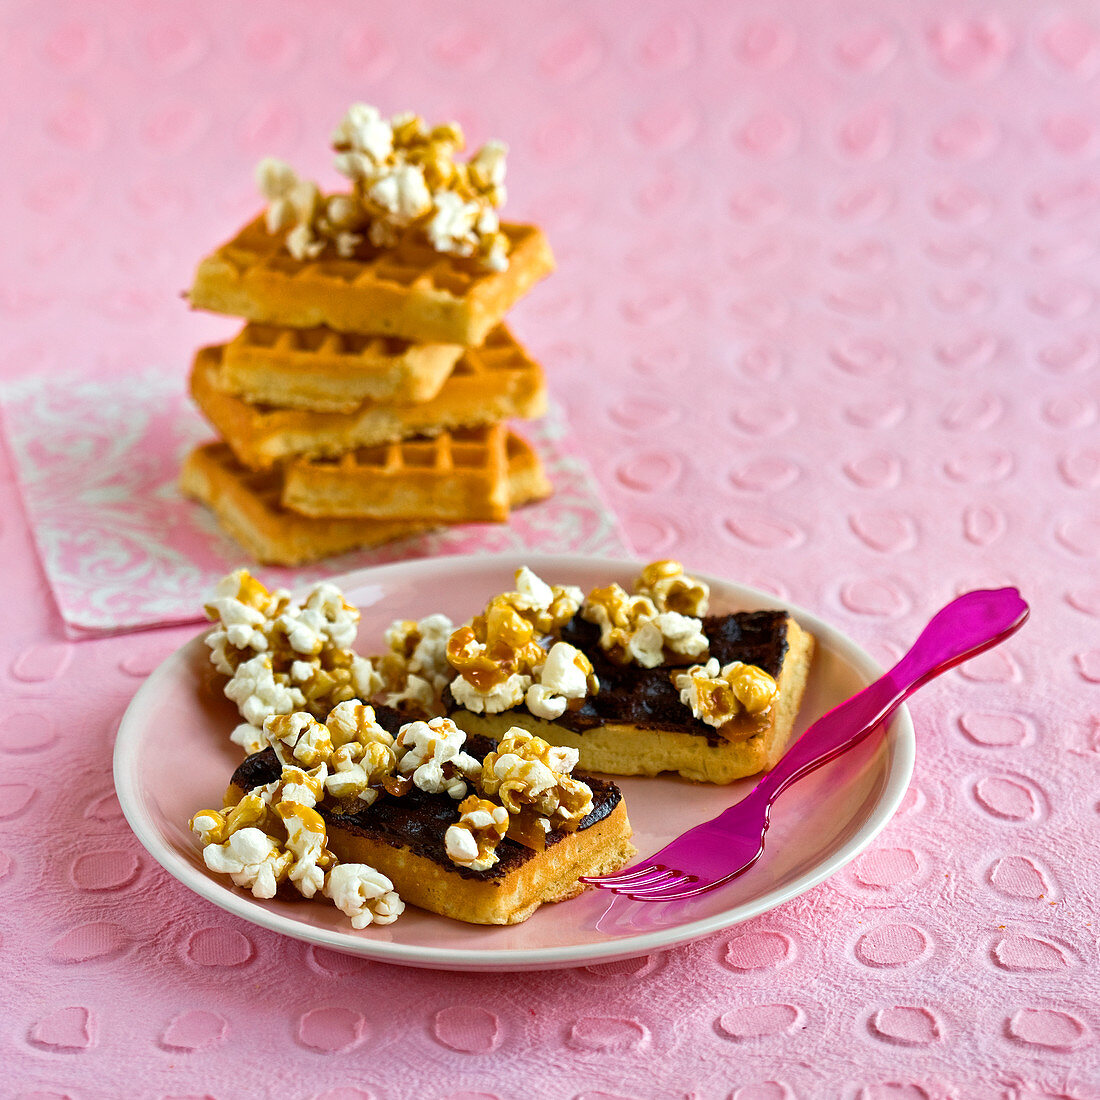 Waffles with chocolate and caramel popcorn